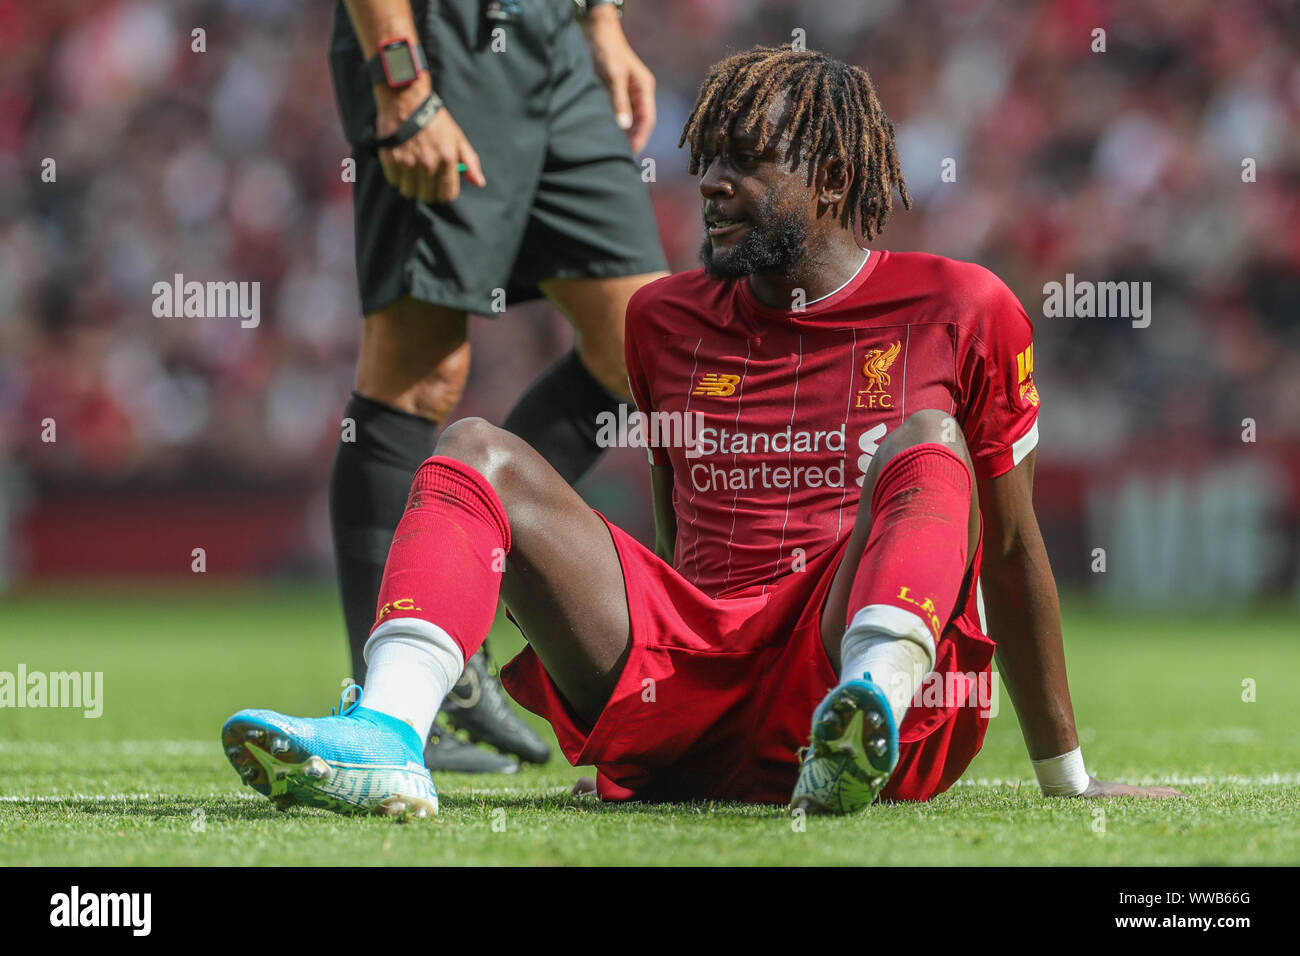 Liverpool, UK. 14th Sep, 2019. Premier League Football, Liverpool vs Newcastle United ; Divock Origi (27) of Liverpool sits injured on the floor Credit: Mark Cosgrove/News Images Premier League/EFL Football images are subject to DataCo Licence Credit: News Images /Alamy Live News Stock Photo